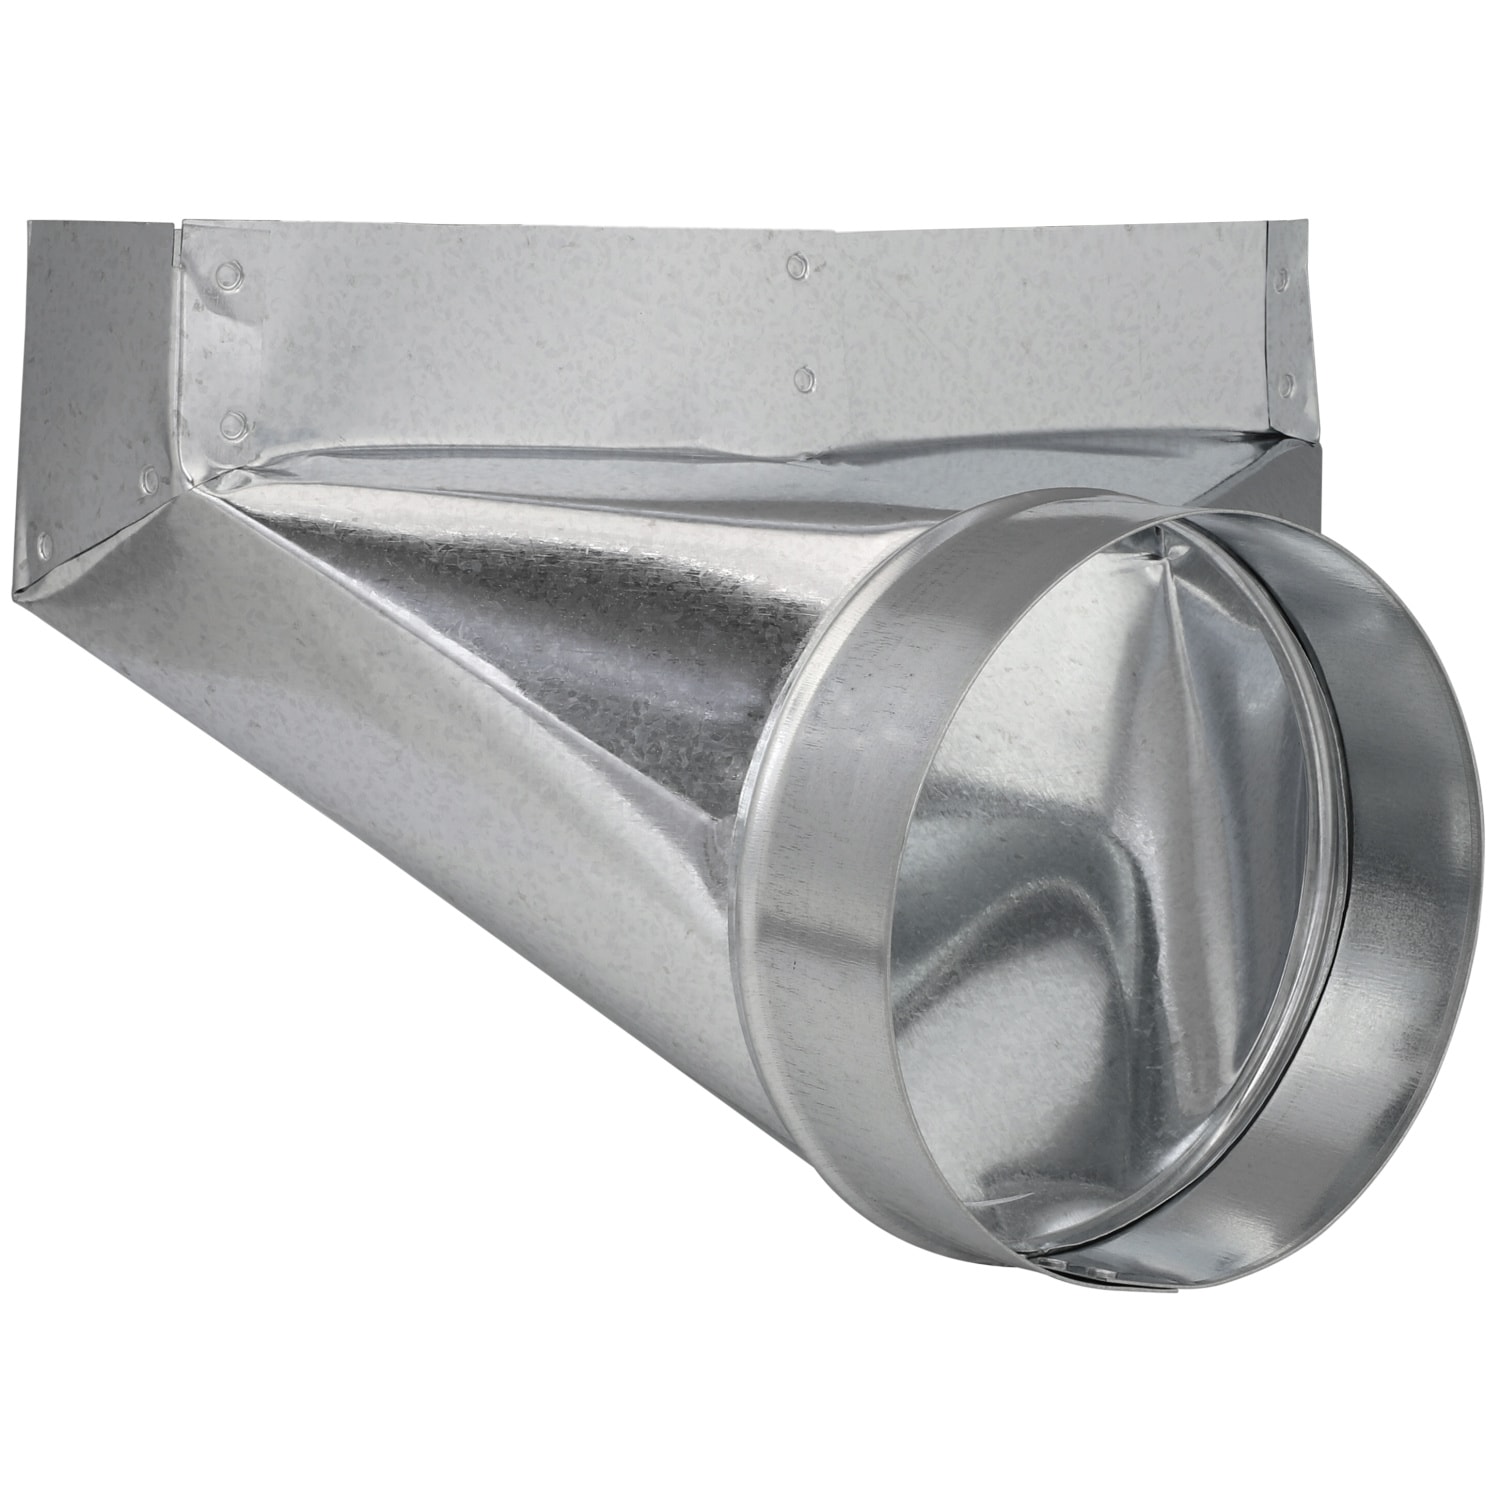 IMPERIAL 4-in Galvanized Steel 90 Degree Register Duct Boot in the